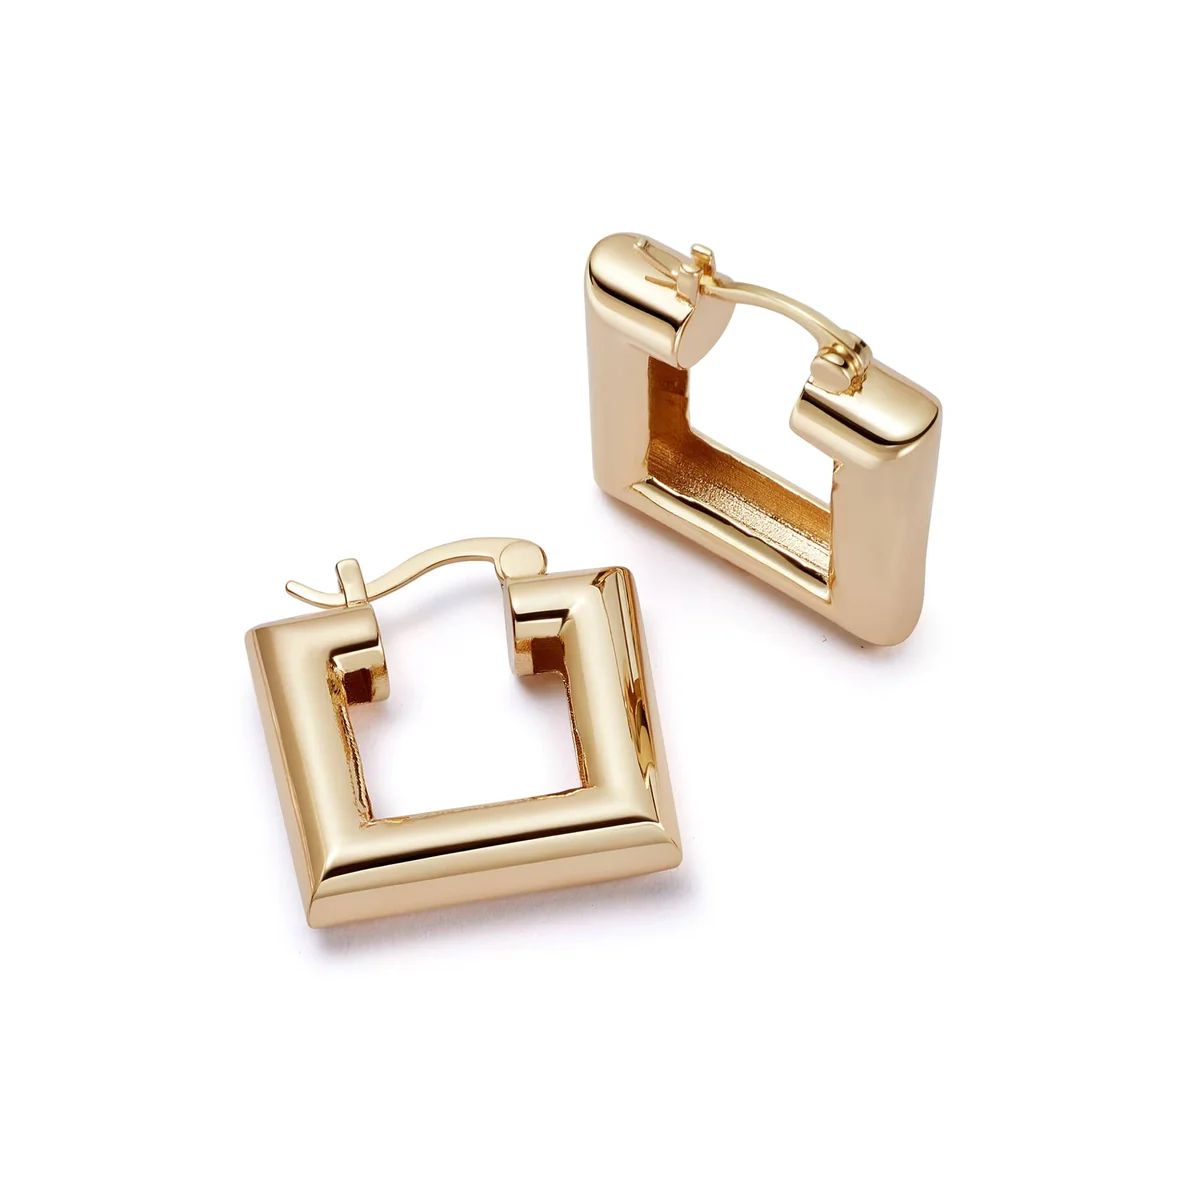 Polly Sayer Chubby Square Hoop Earrings 18ct Gold Plate | Daisy London Jewellery